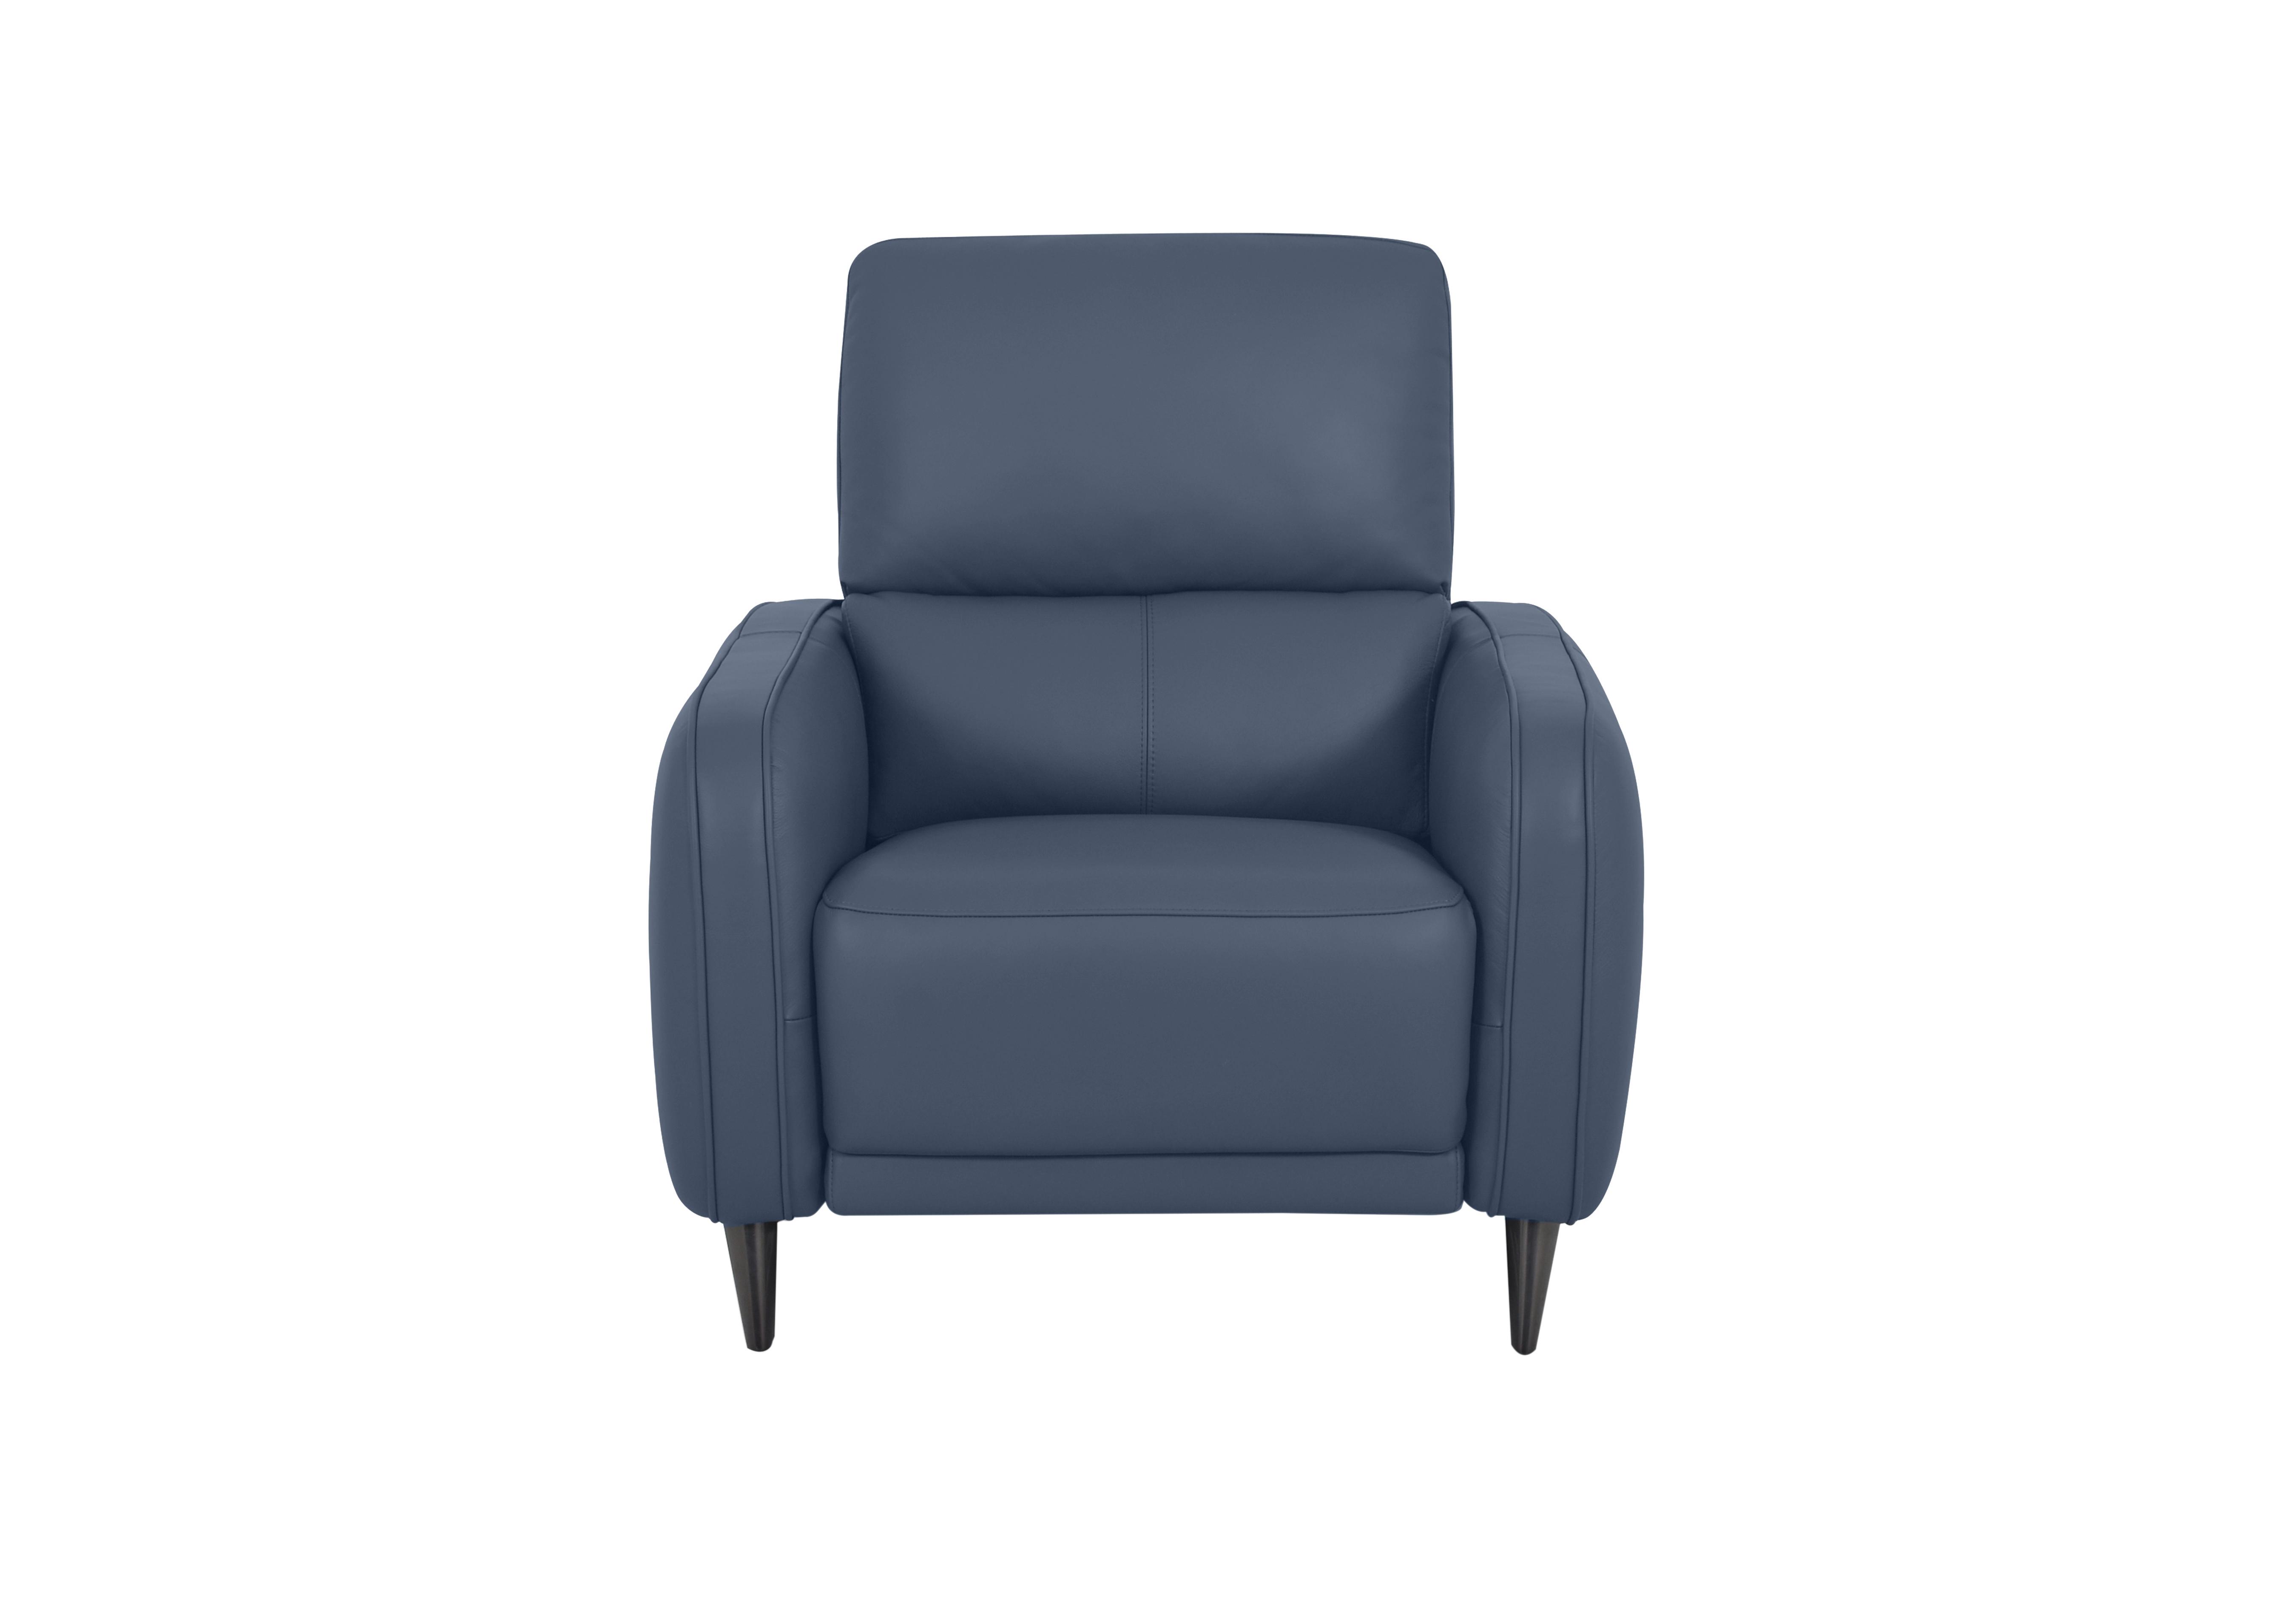 Logan Leather Chair in Np-518e Ocean Blue on Furniture Village